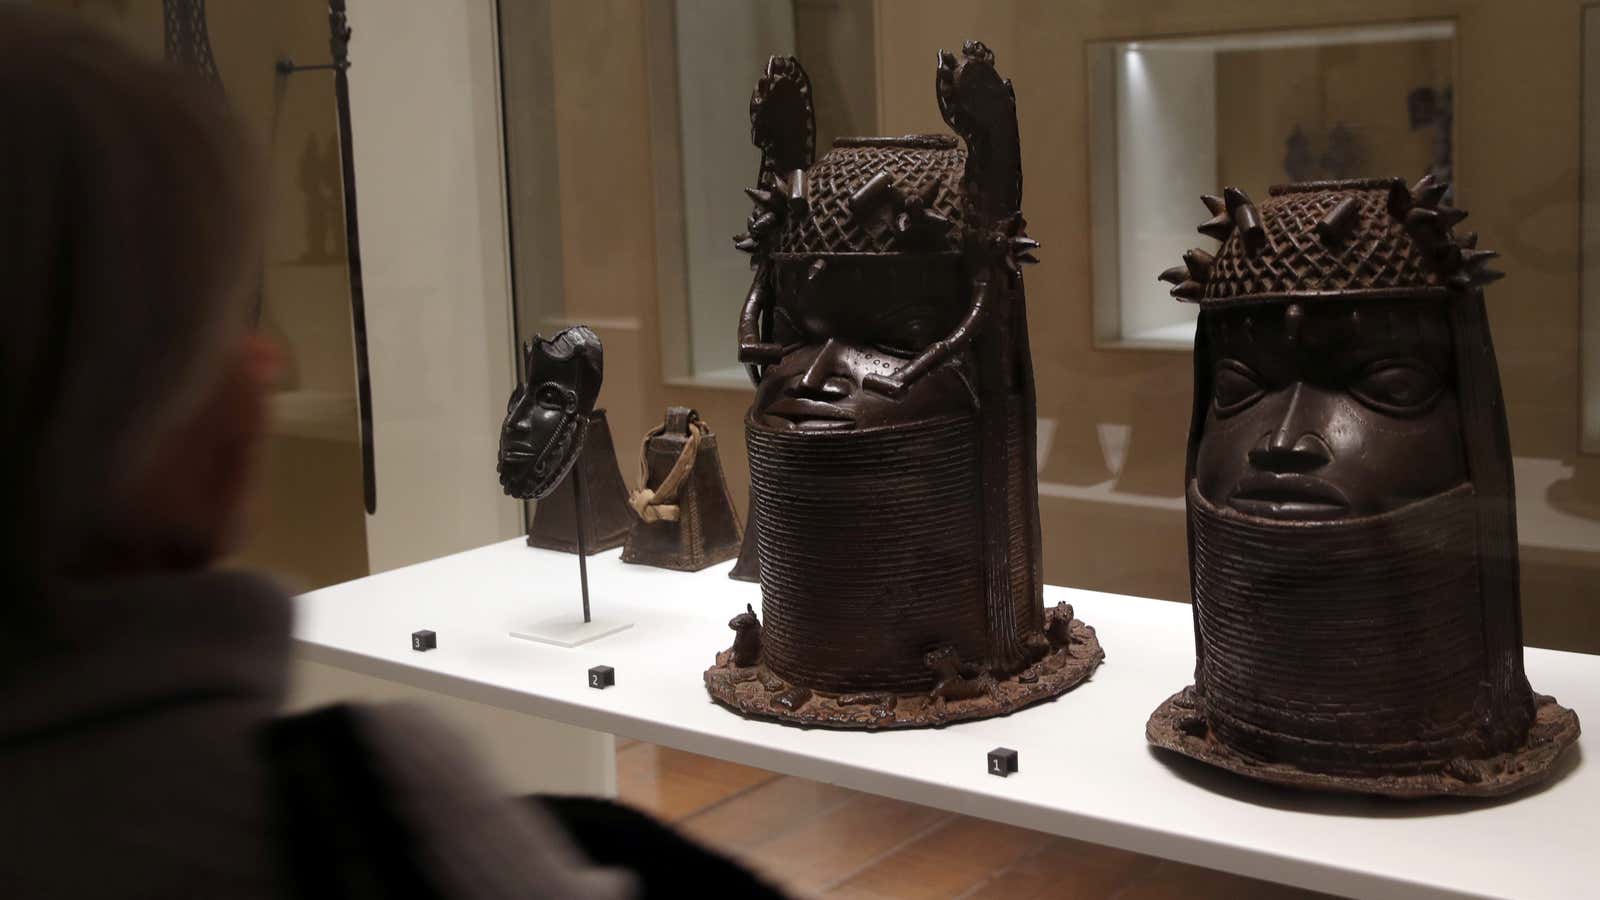 Two heads of a royal ancestor (Uhunmwun Elao), from the former Benin Kingdom, a part of modern-day Nigeria, 18th century (R) and 19th century (C) displayed at the Quai Branly Museum in Paris,